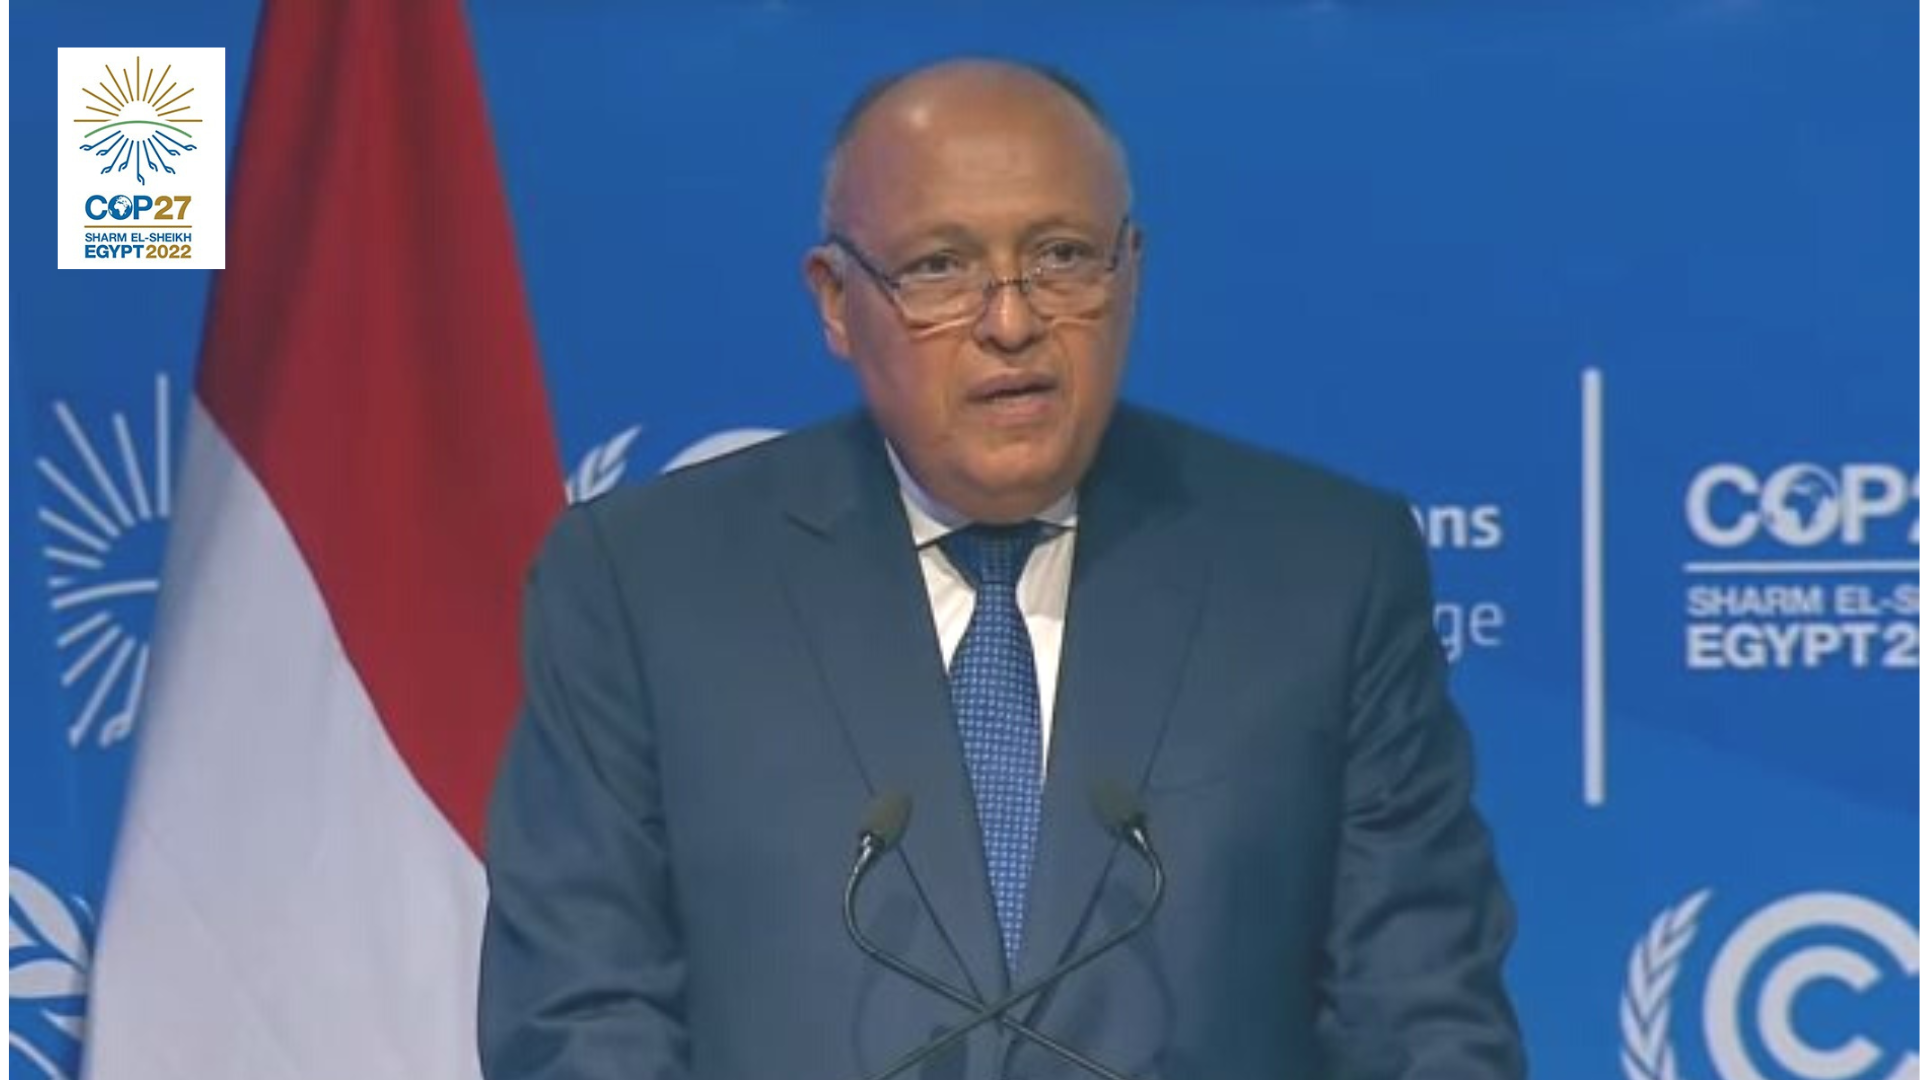 Egypt Foreign Minister Sameh Shoukry elected as COP27 President